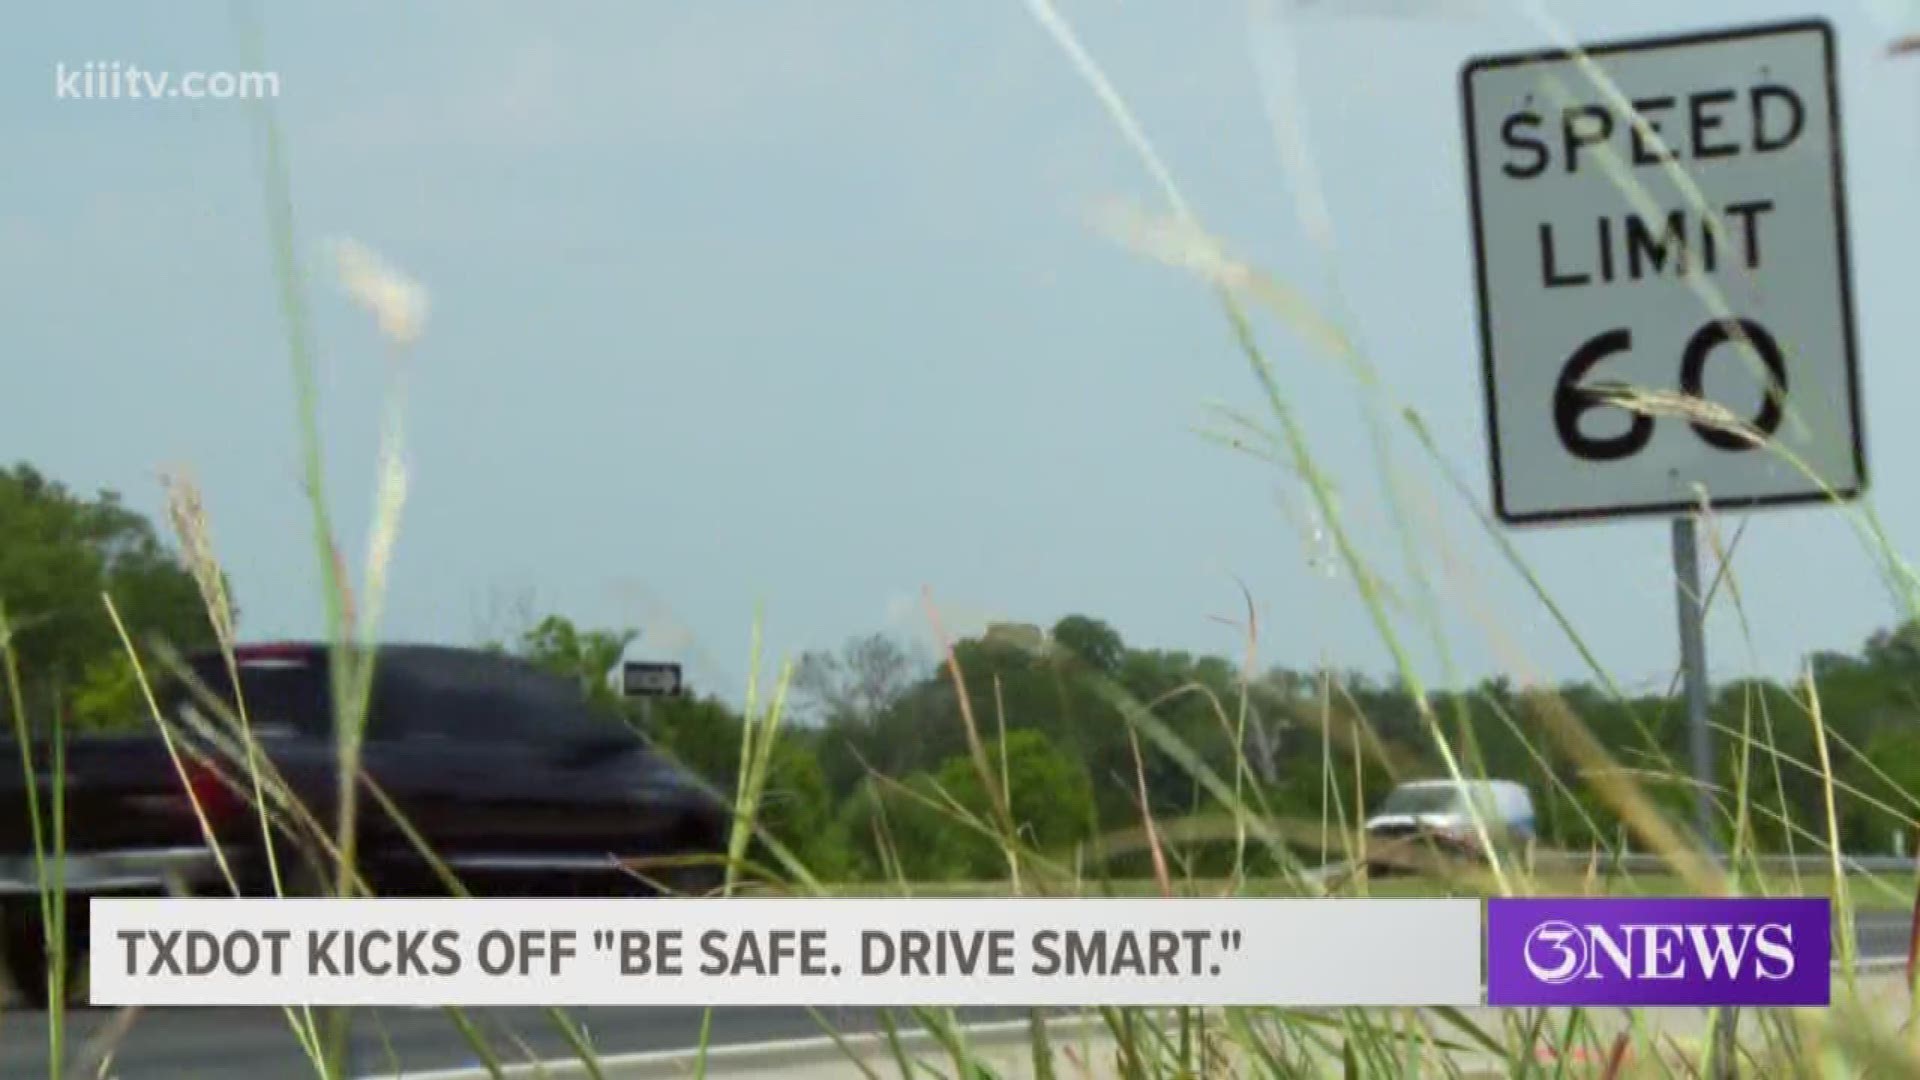 State officials want motorists to be safe while traveling the state's highways during the busy summer driving season.